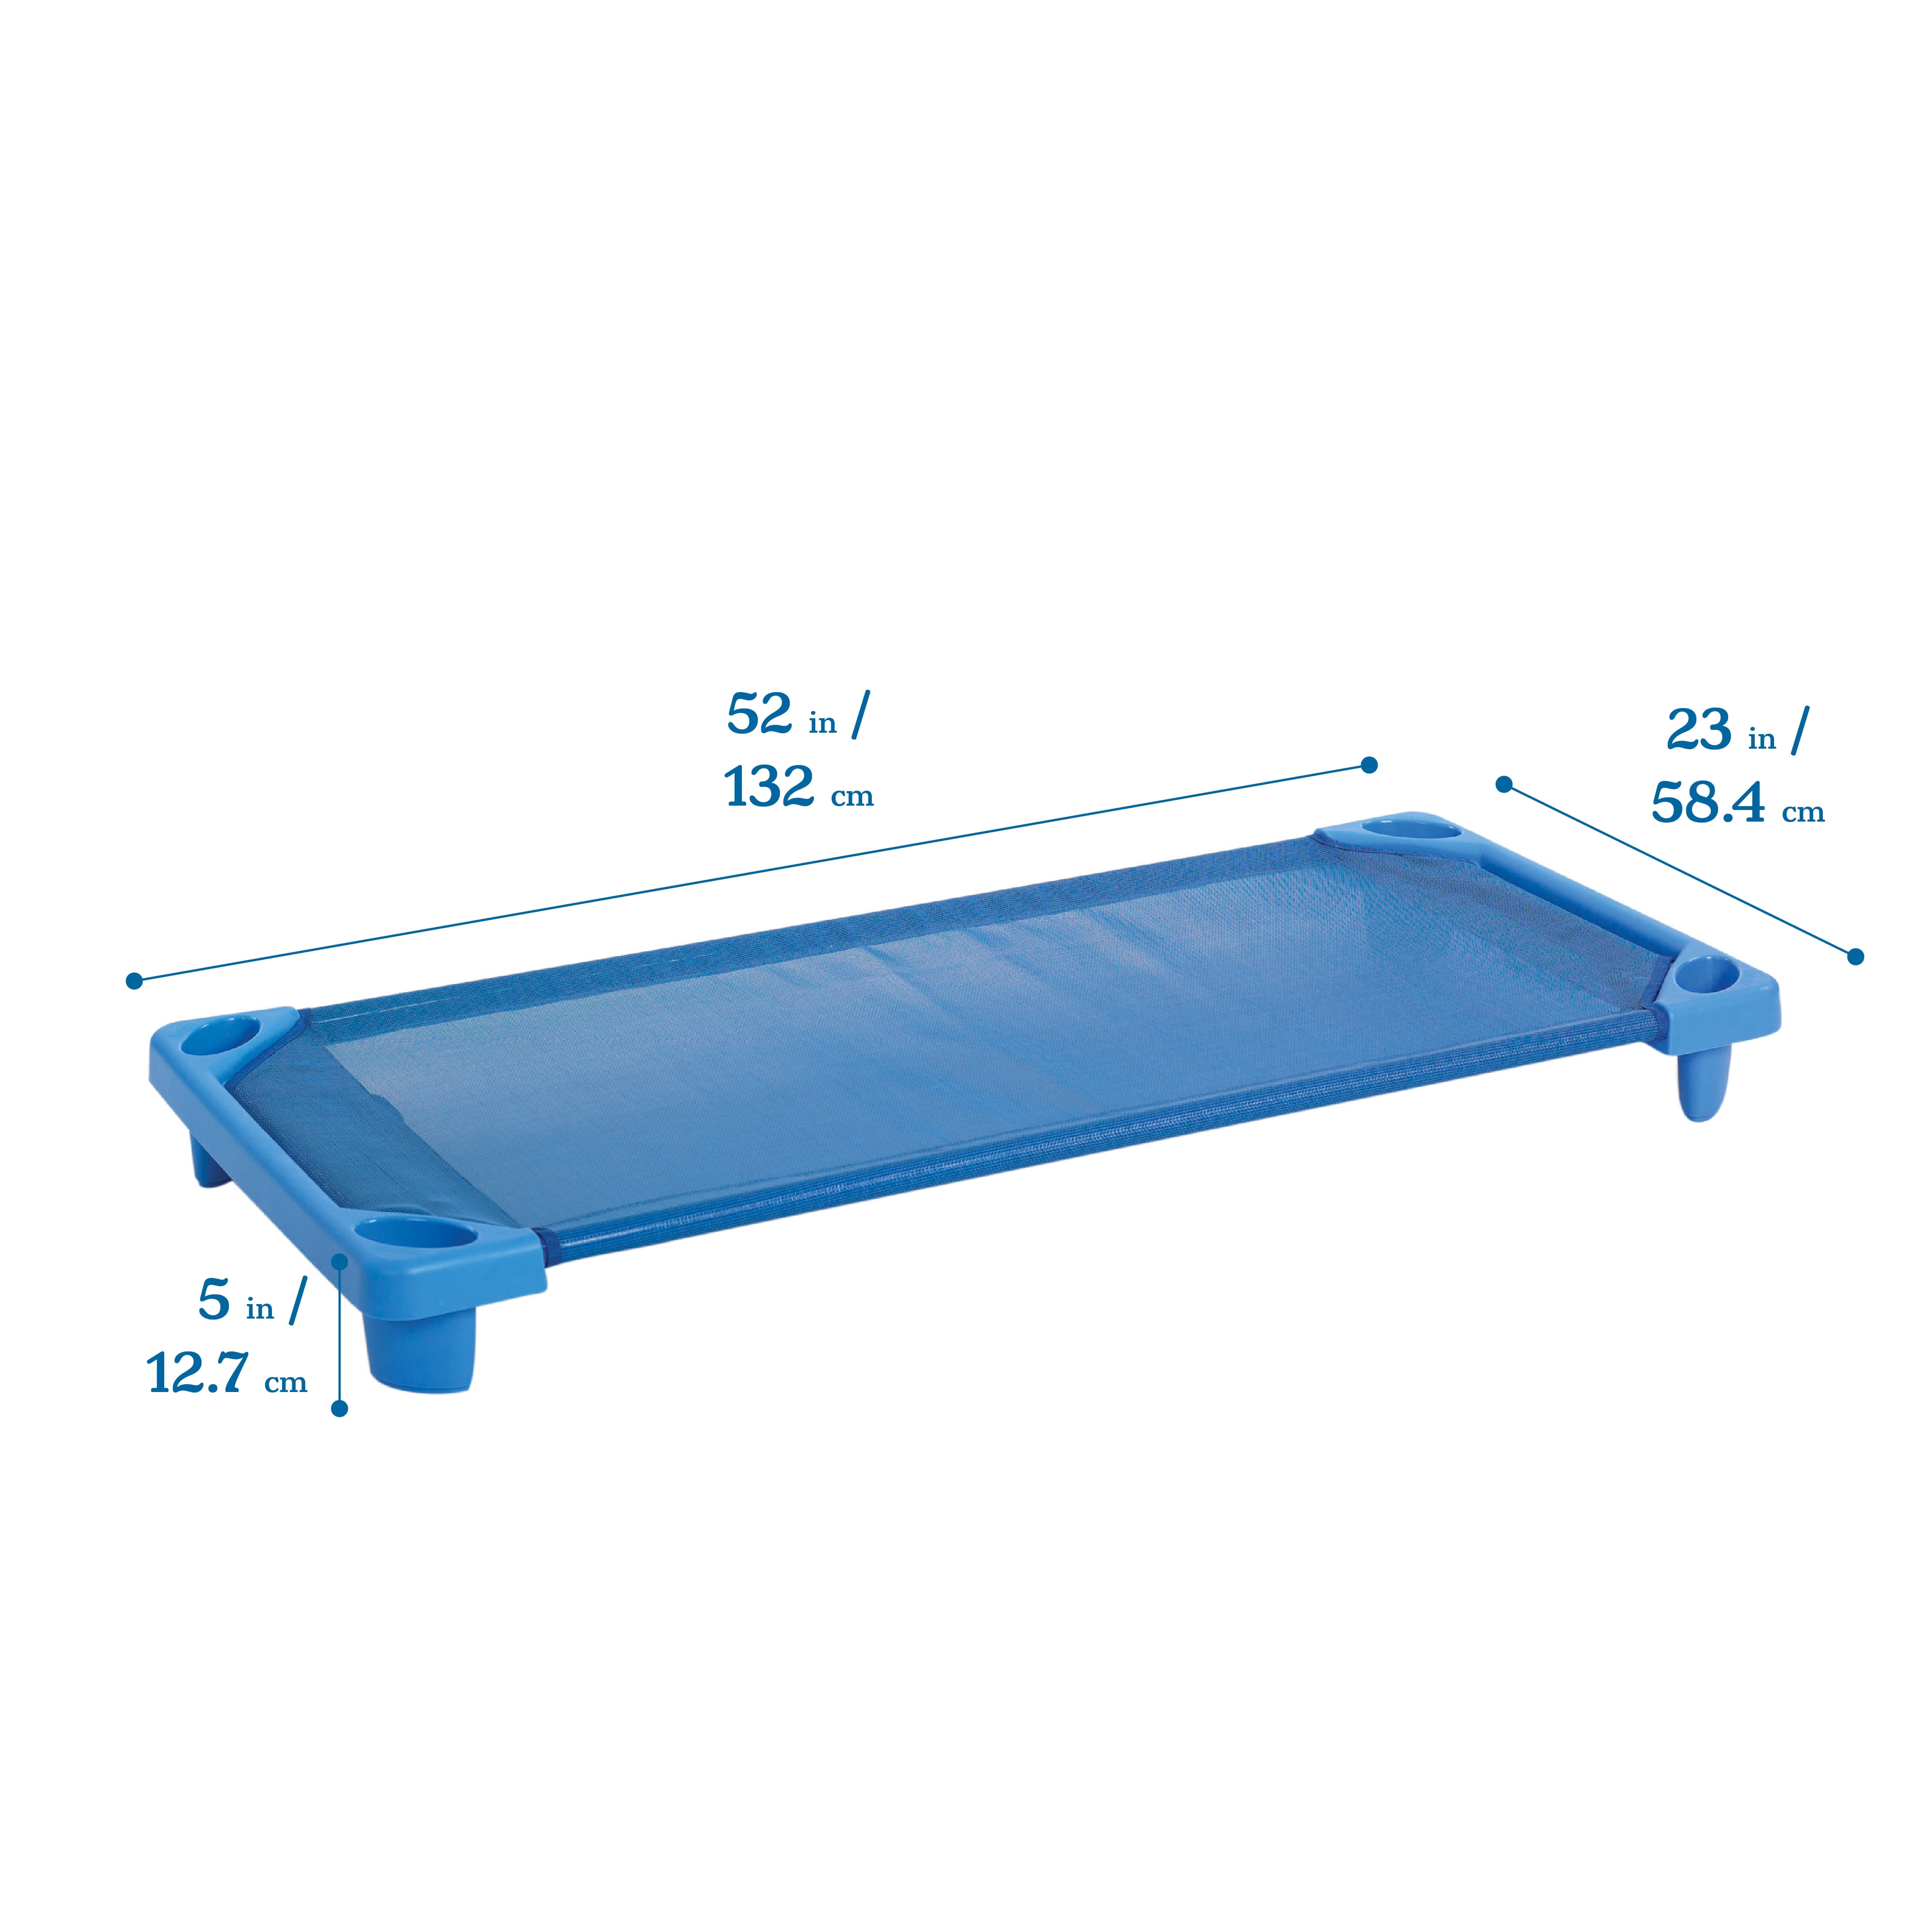 ECR4Kids Streamline Childrens Naptime Cot 52 L x 23 W Set of 6 Ready-to-Assemble Stackable Daycare Sleeping Cot for Kids Blue 